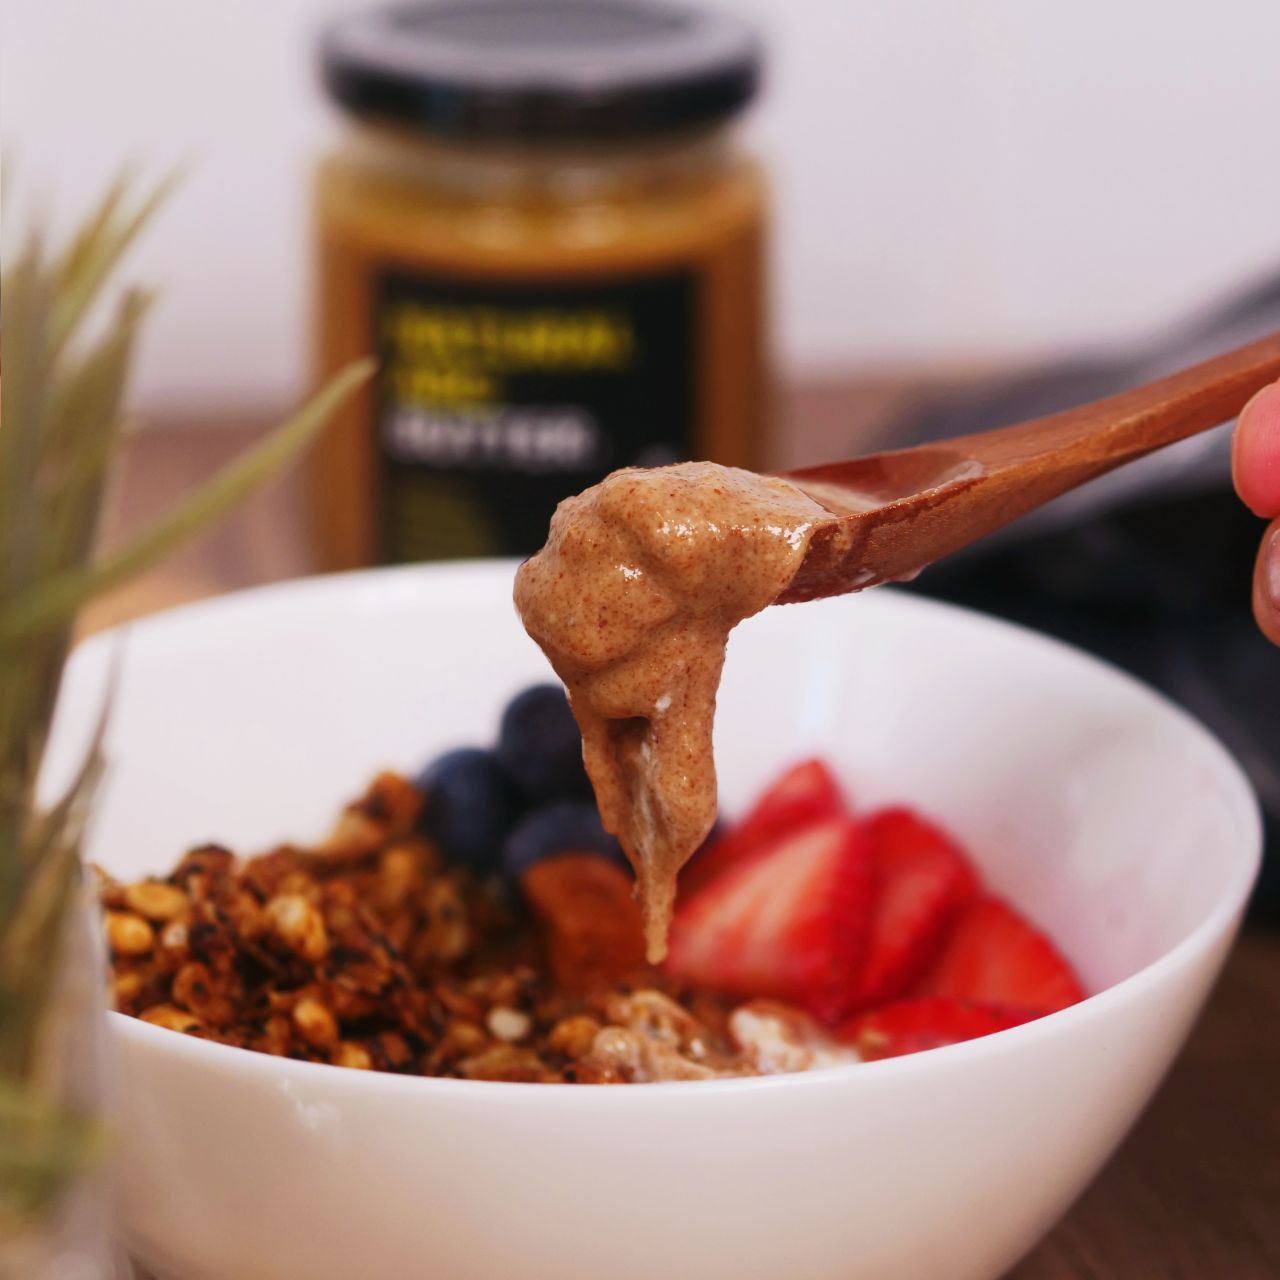 Revive - Singapore's Granola, Nut Butters and Oats for your Breakfast